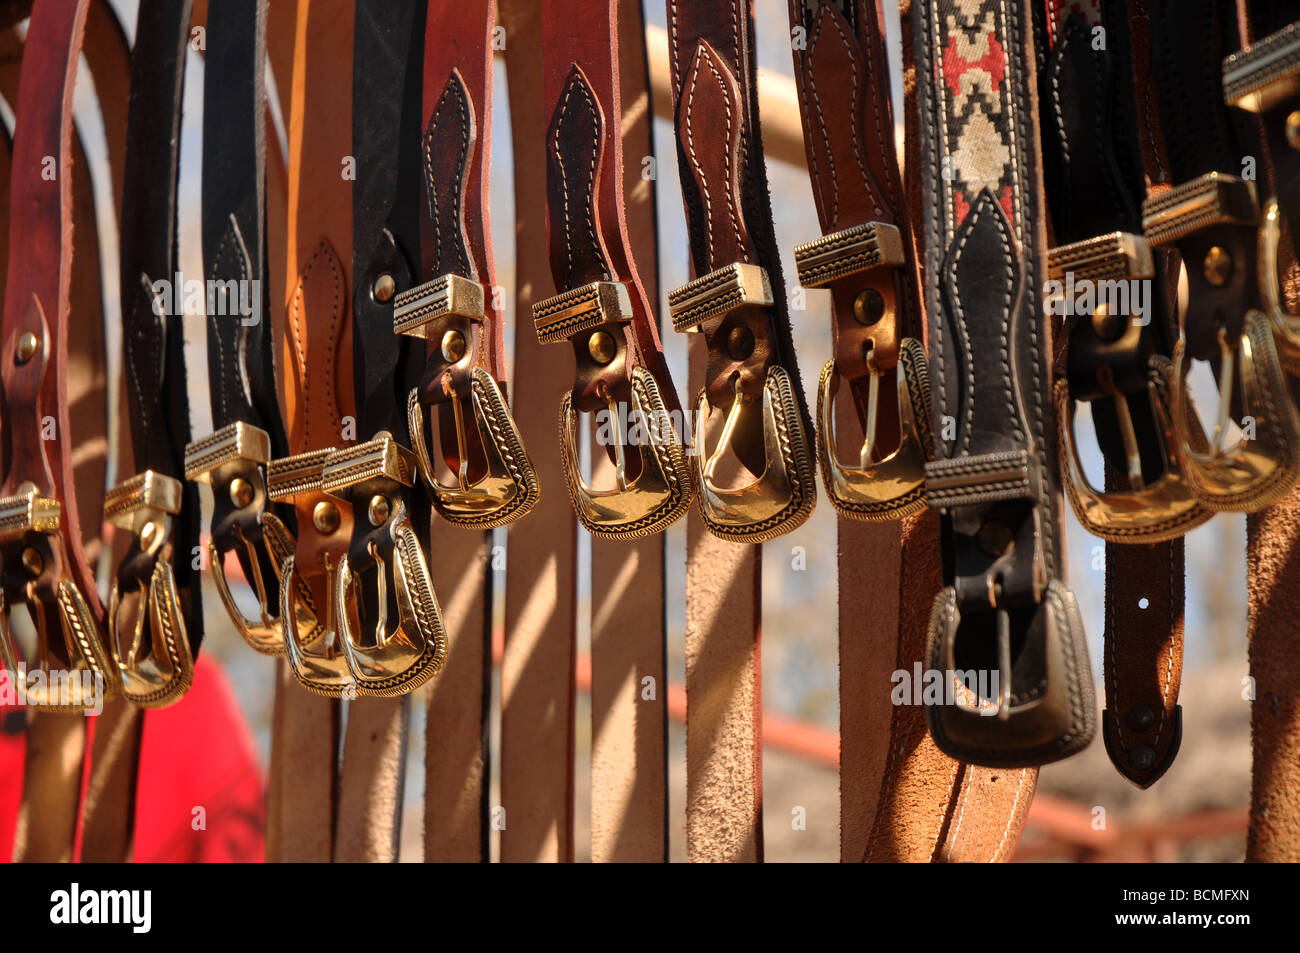 Leather belts with golden buckles displayed for sale at a local market in the north of Argentina Stock Photo